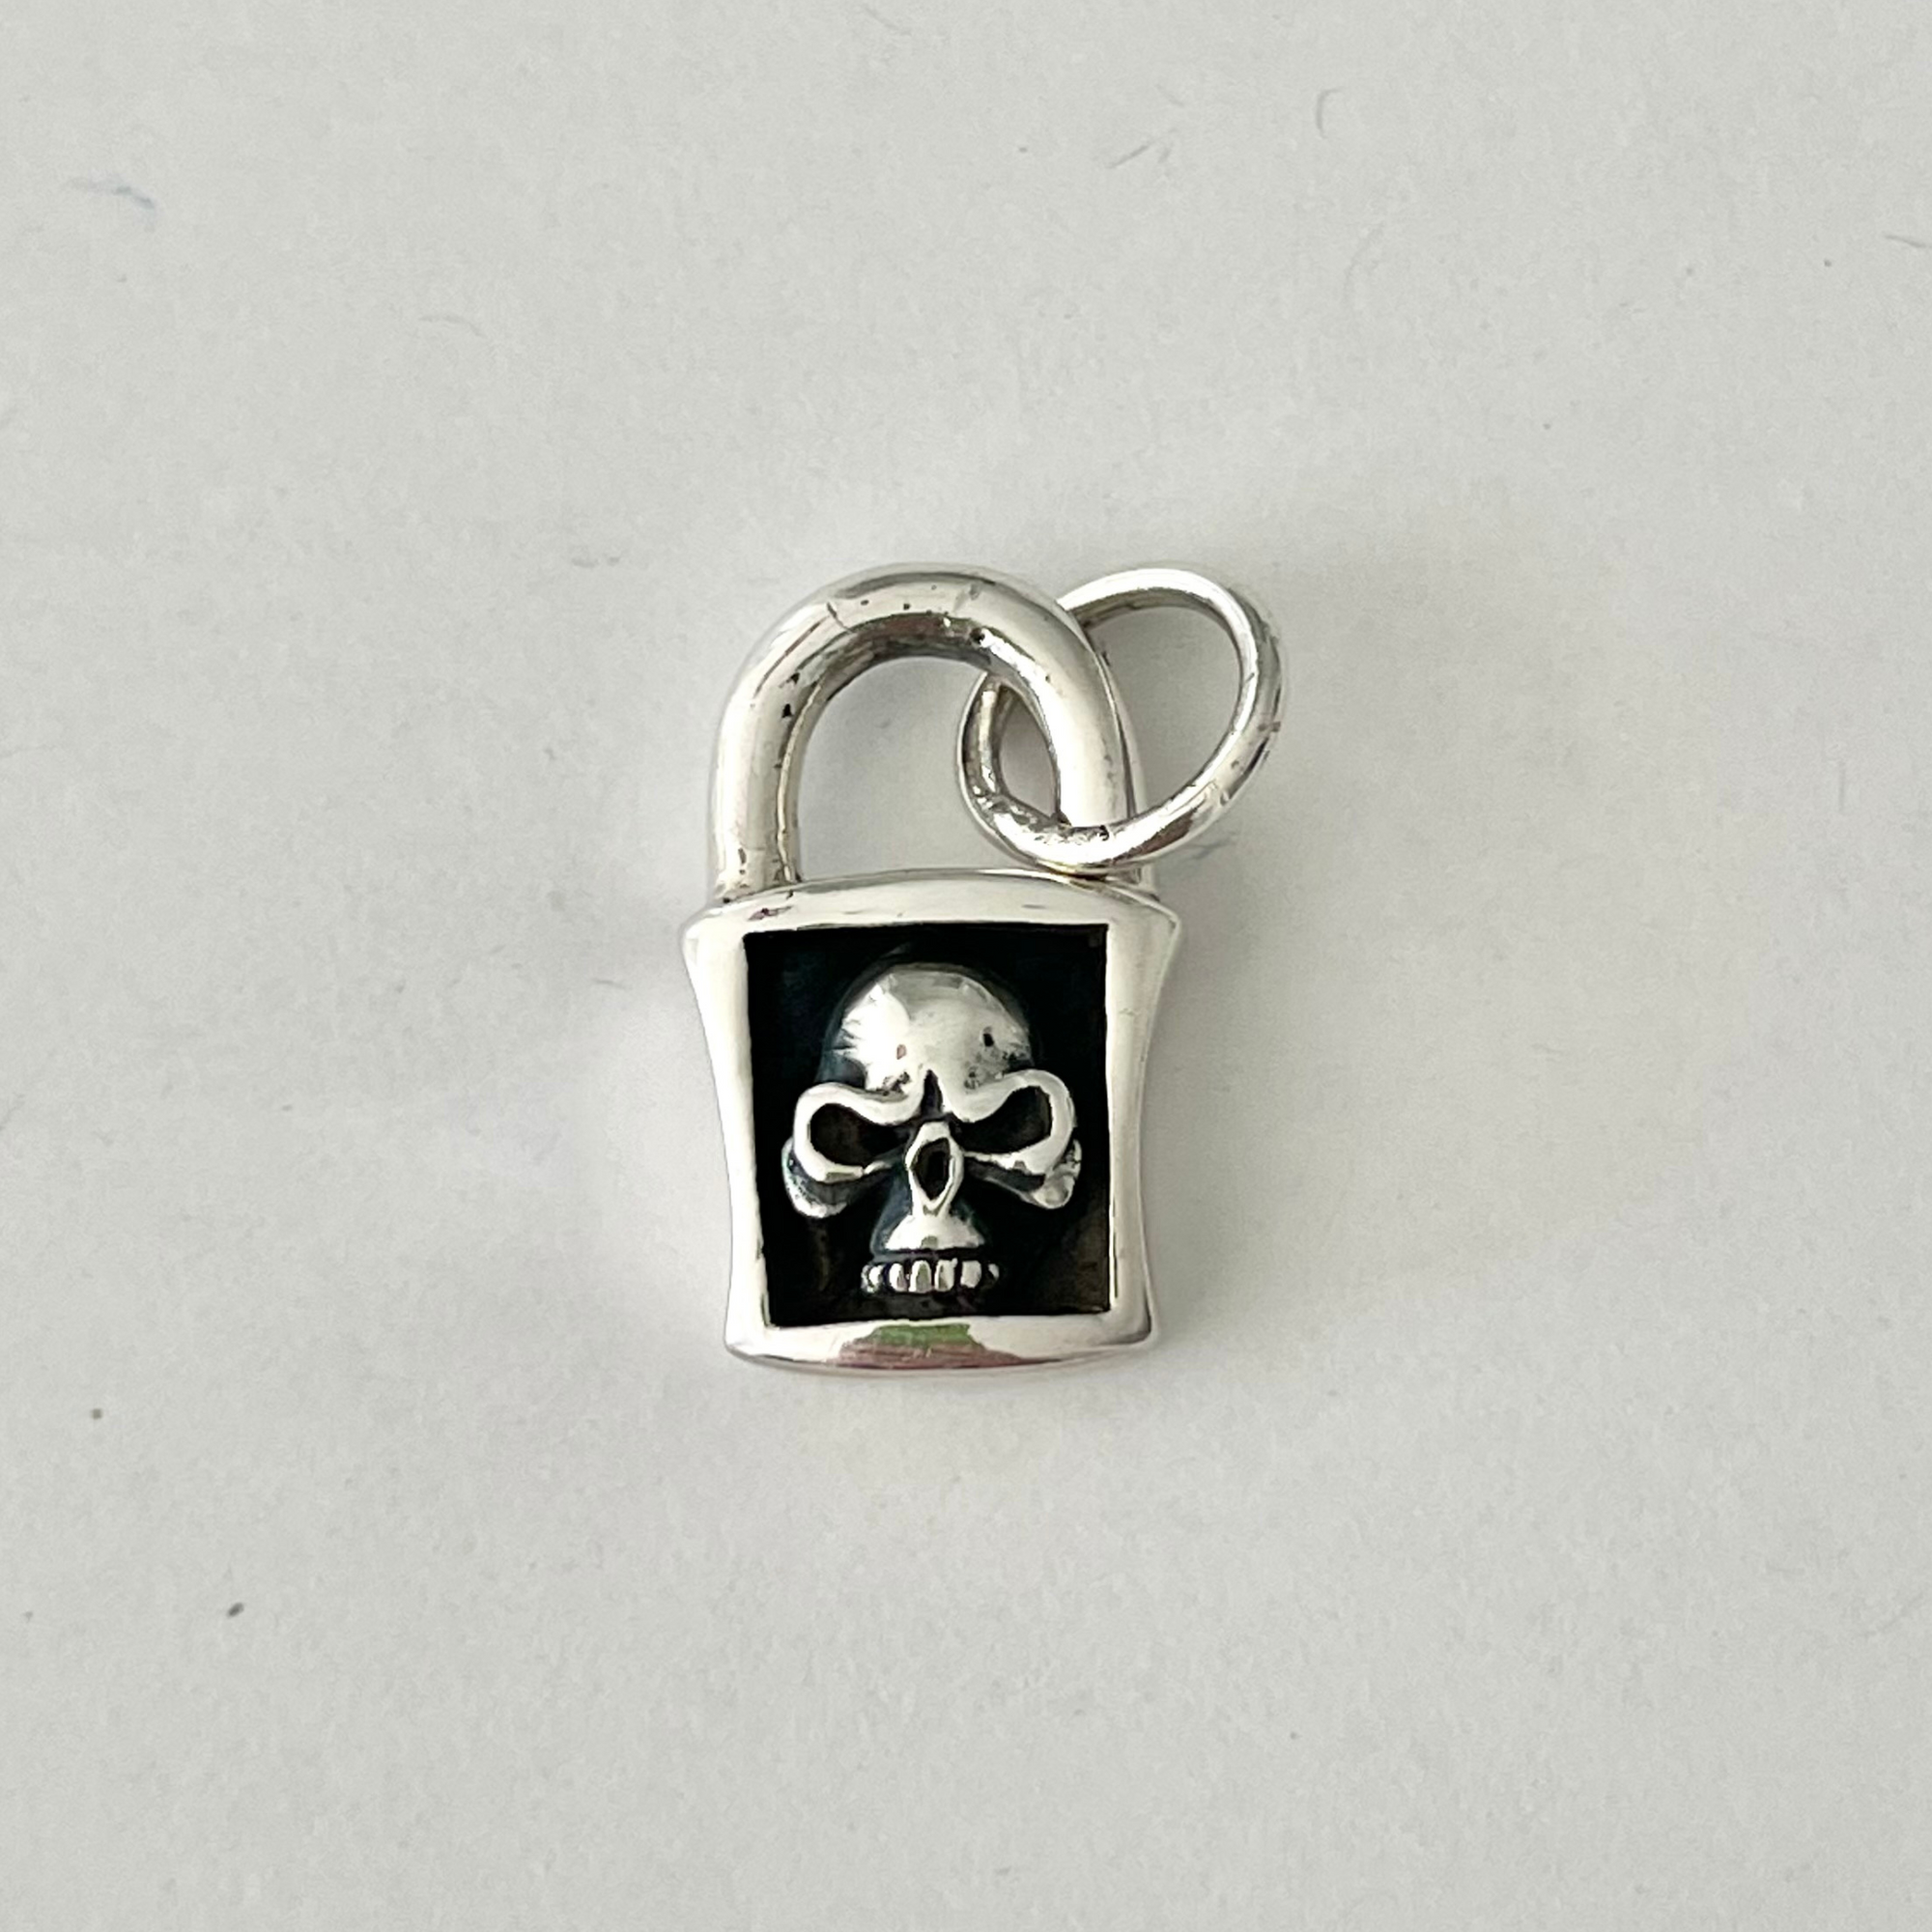 Perfect .925 solid sterling silver Skull Charm. Charming on a necklace or bracelet; add it to a charm ring to customize your look; coordinate it with other charms to reflect your personal style and story.